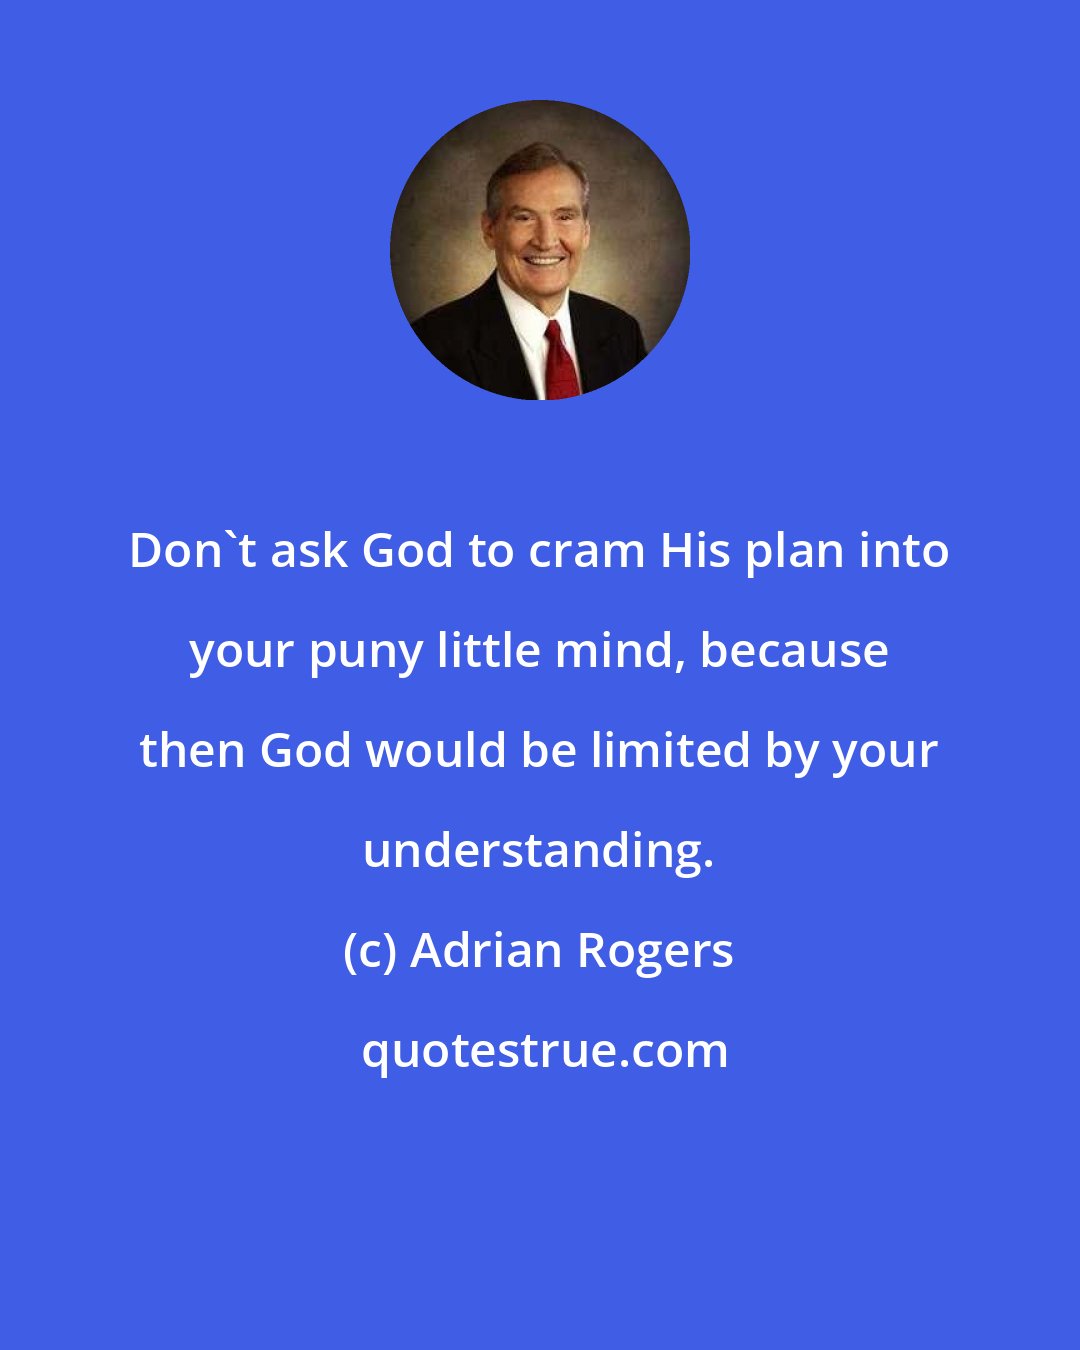 Adrian Rogers: Don't ask God to cram His plan into your puny little mind, because then God would be limited by your understanding.